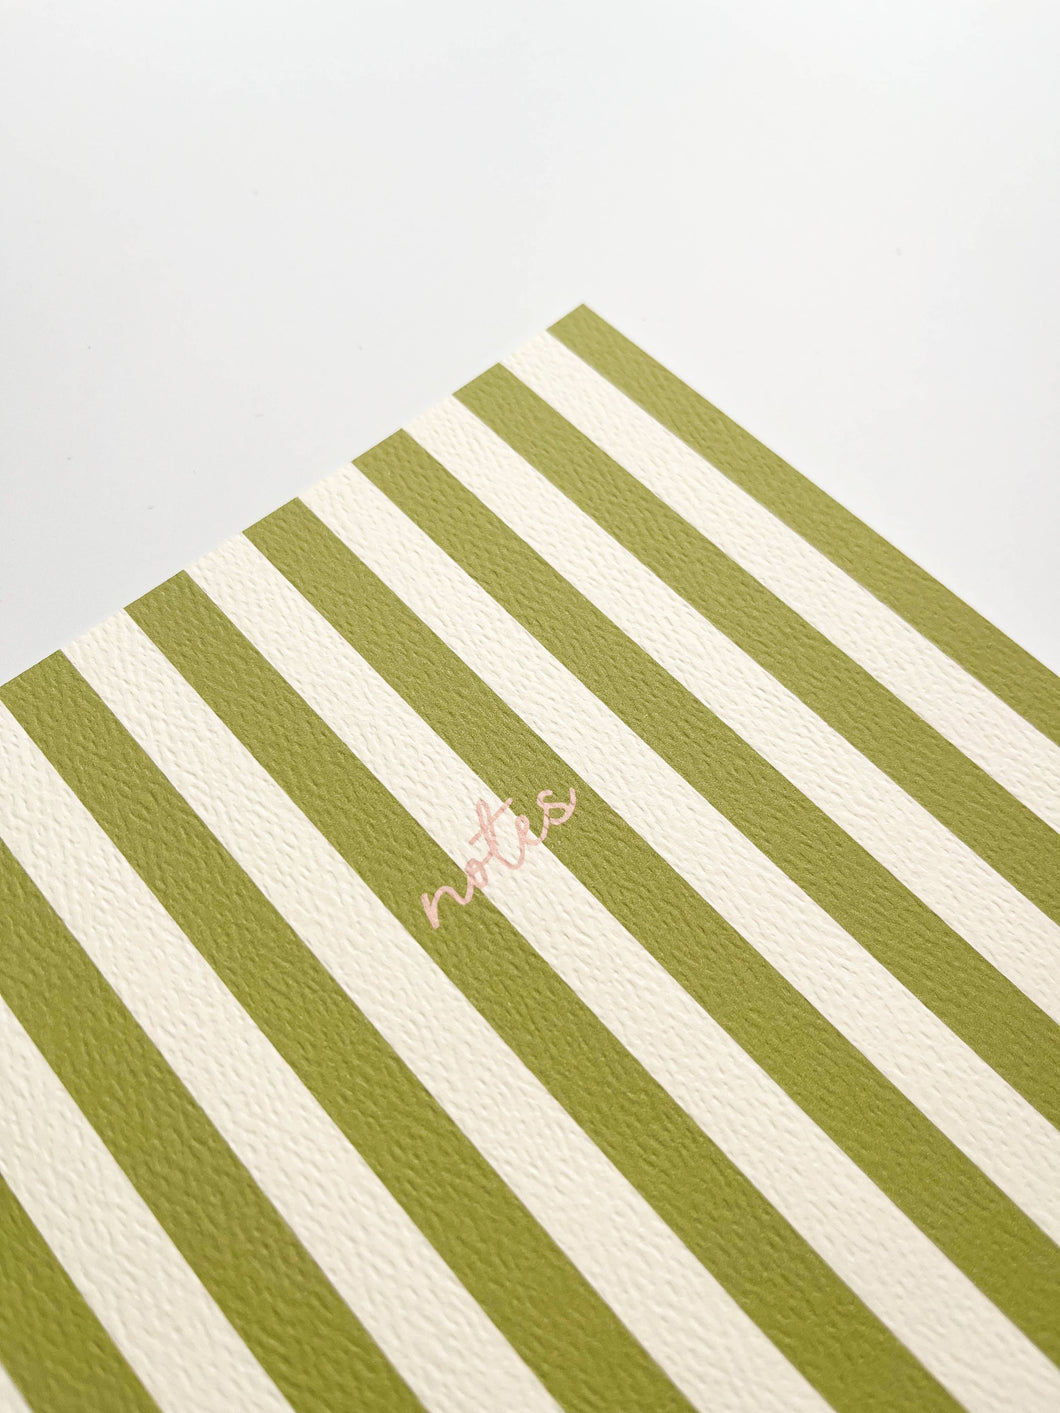 Striped Notebook with Contrast Color: A5 / Olive Green